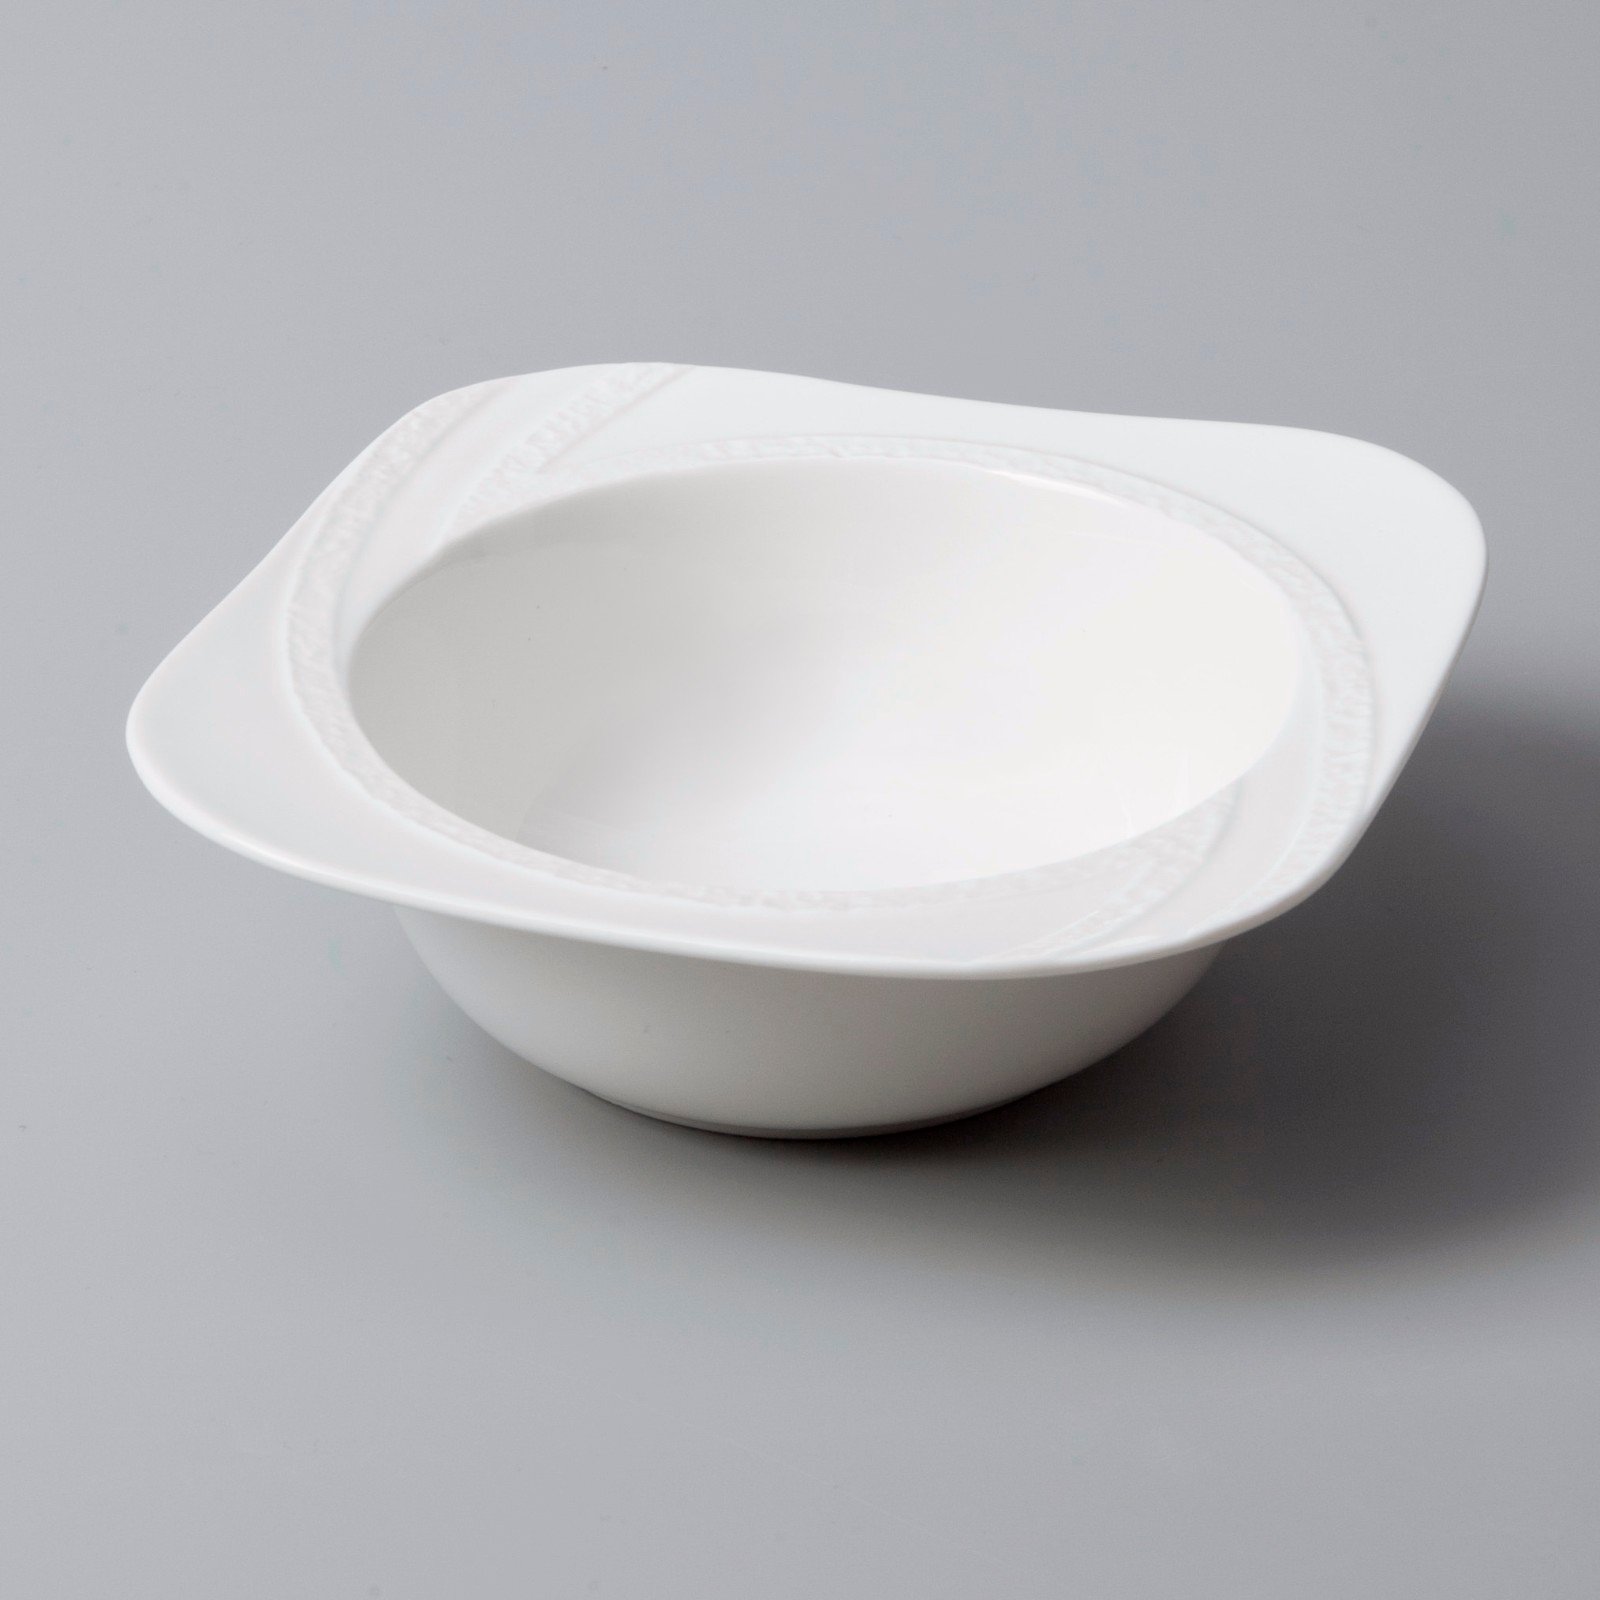 sample hotel crockery online india manufacturer for kitchen Two Eight-4